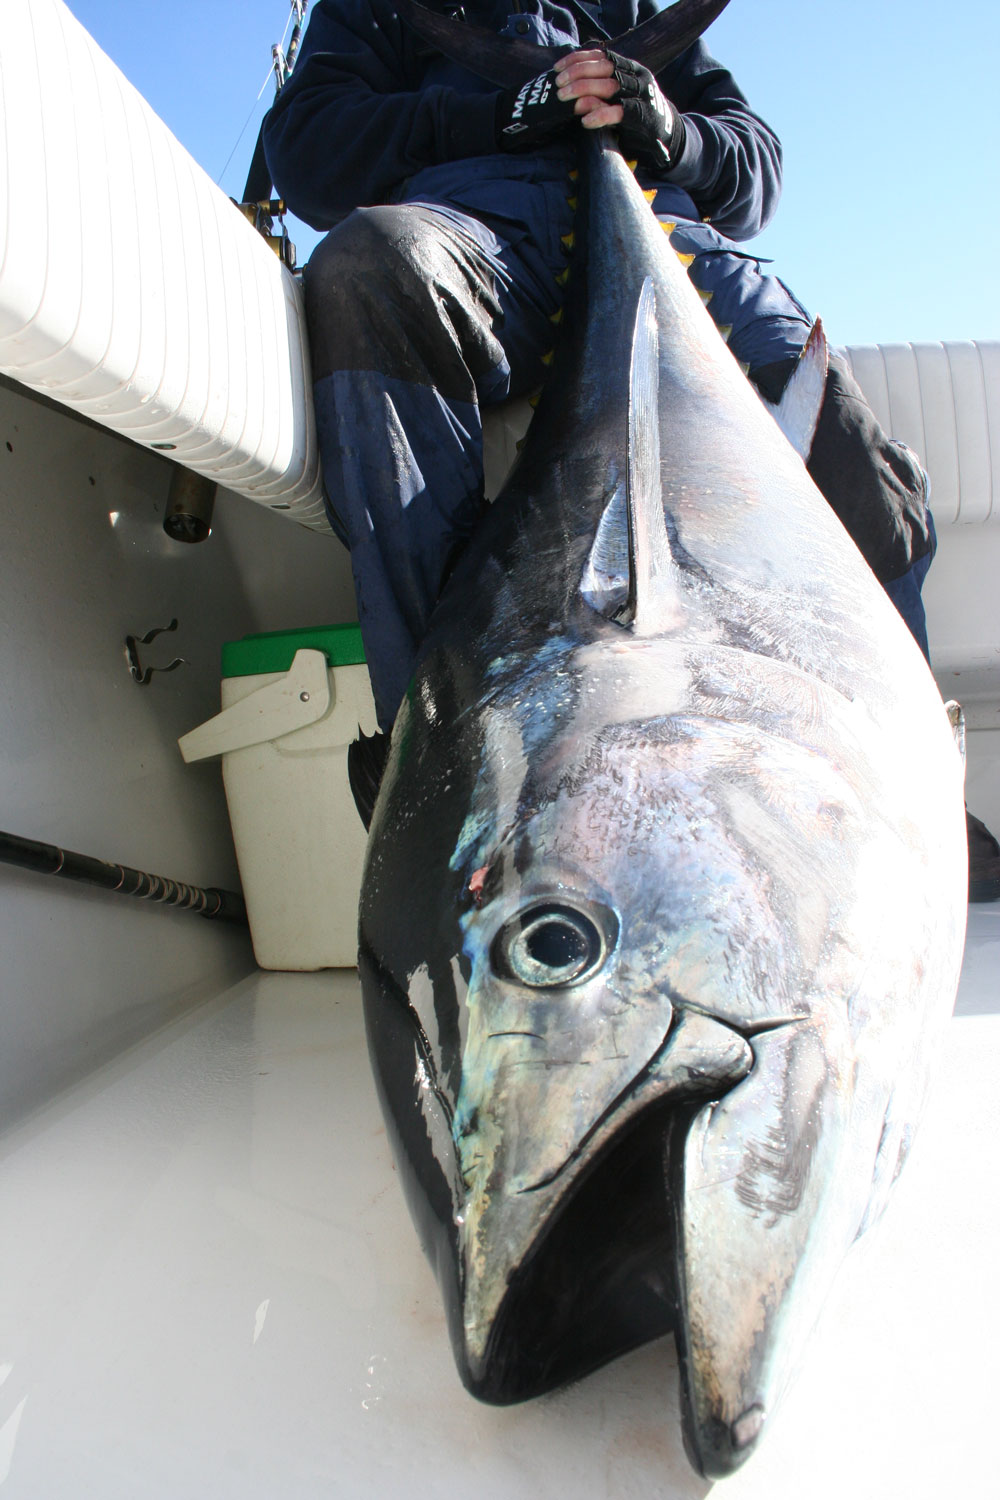 While this bluefin tuna qualifies as a “giant” at over 73” in length, it’s rather average for a giant bluefin caught off the outer banks.